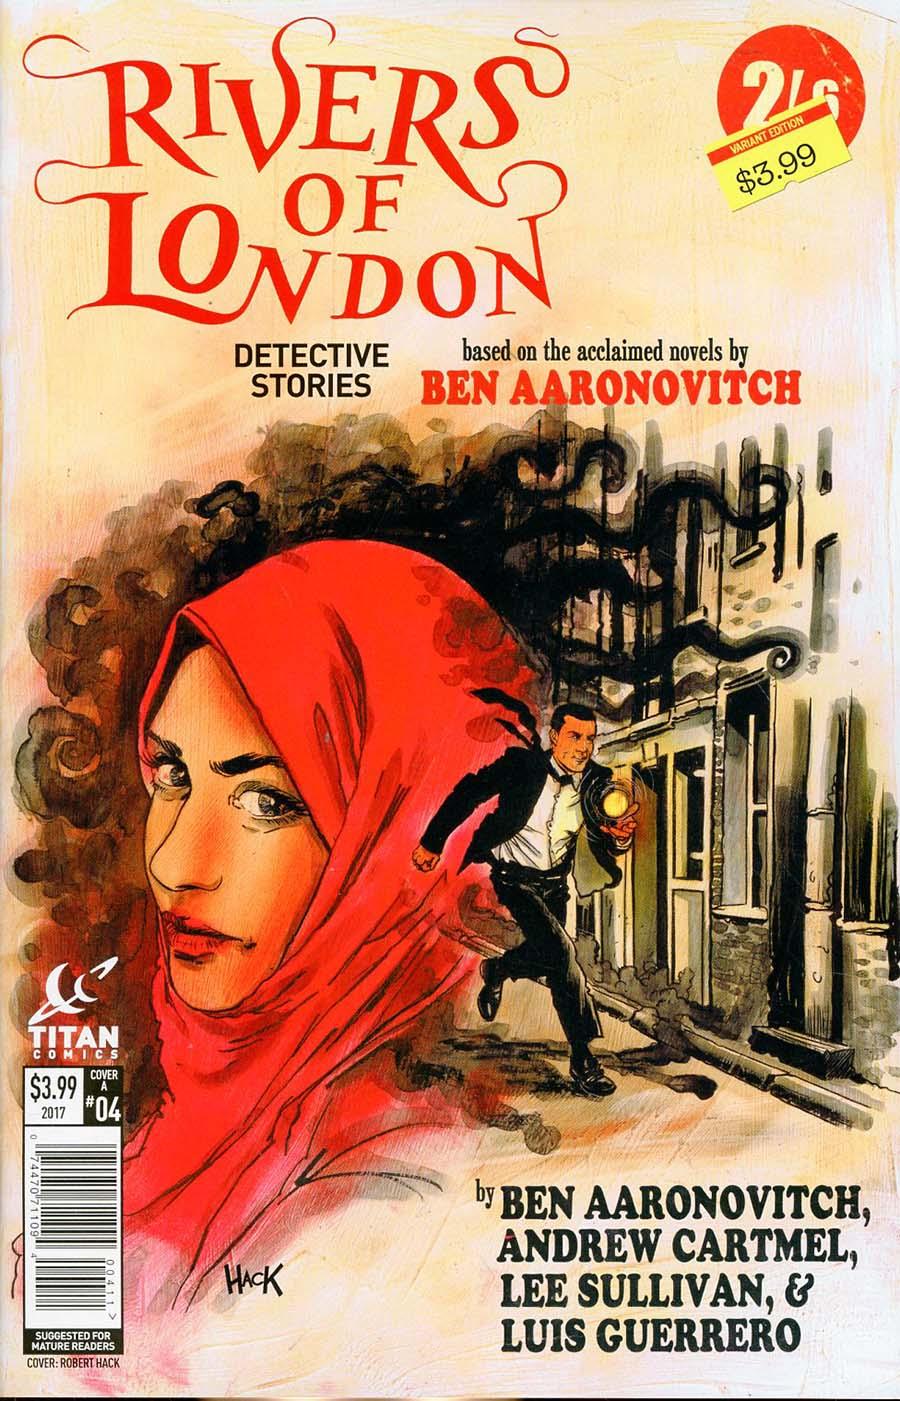 Rivers Of London Detective Stories Vol. 1 #4